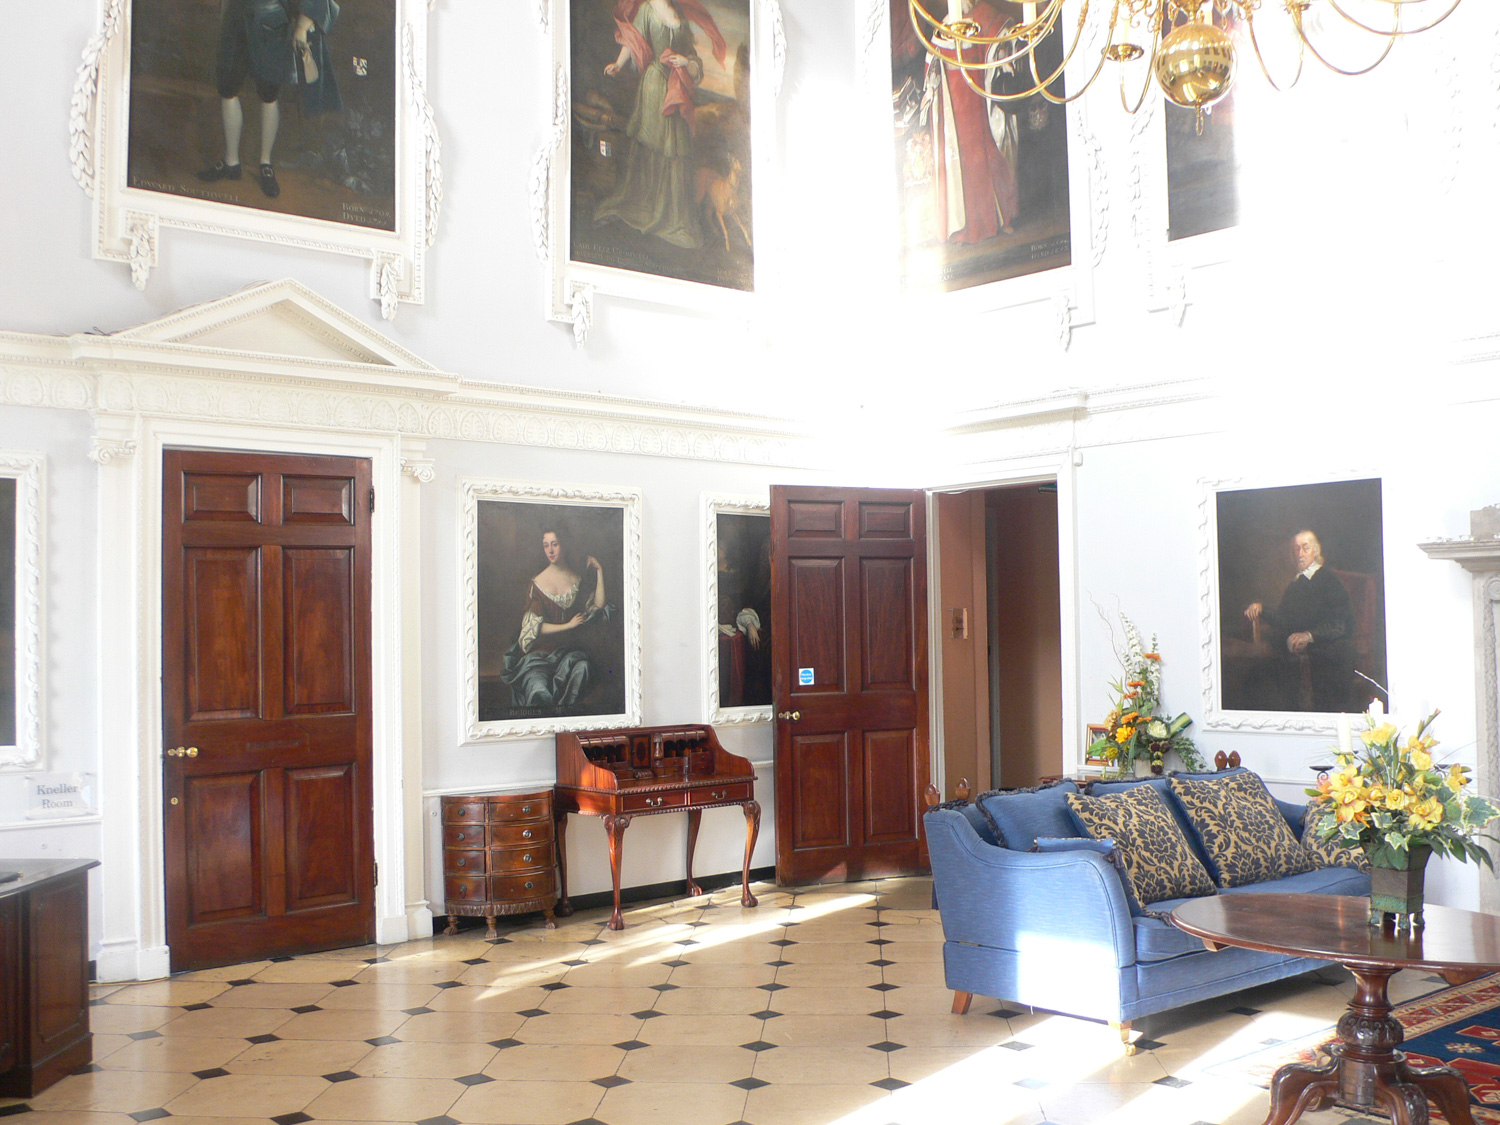 The hall at Kings Weston house